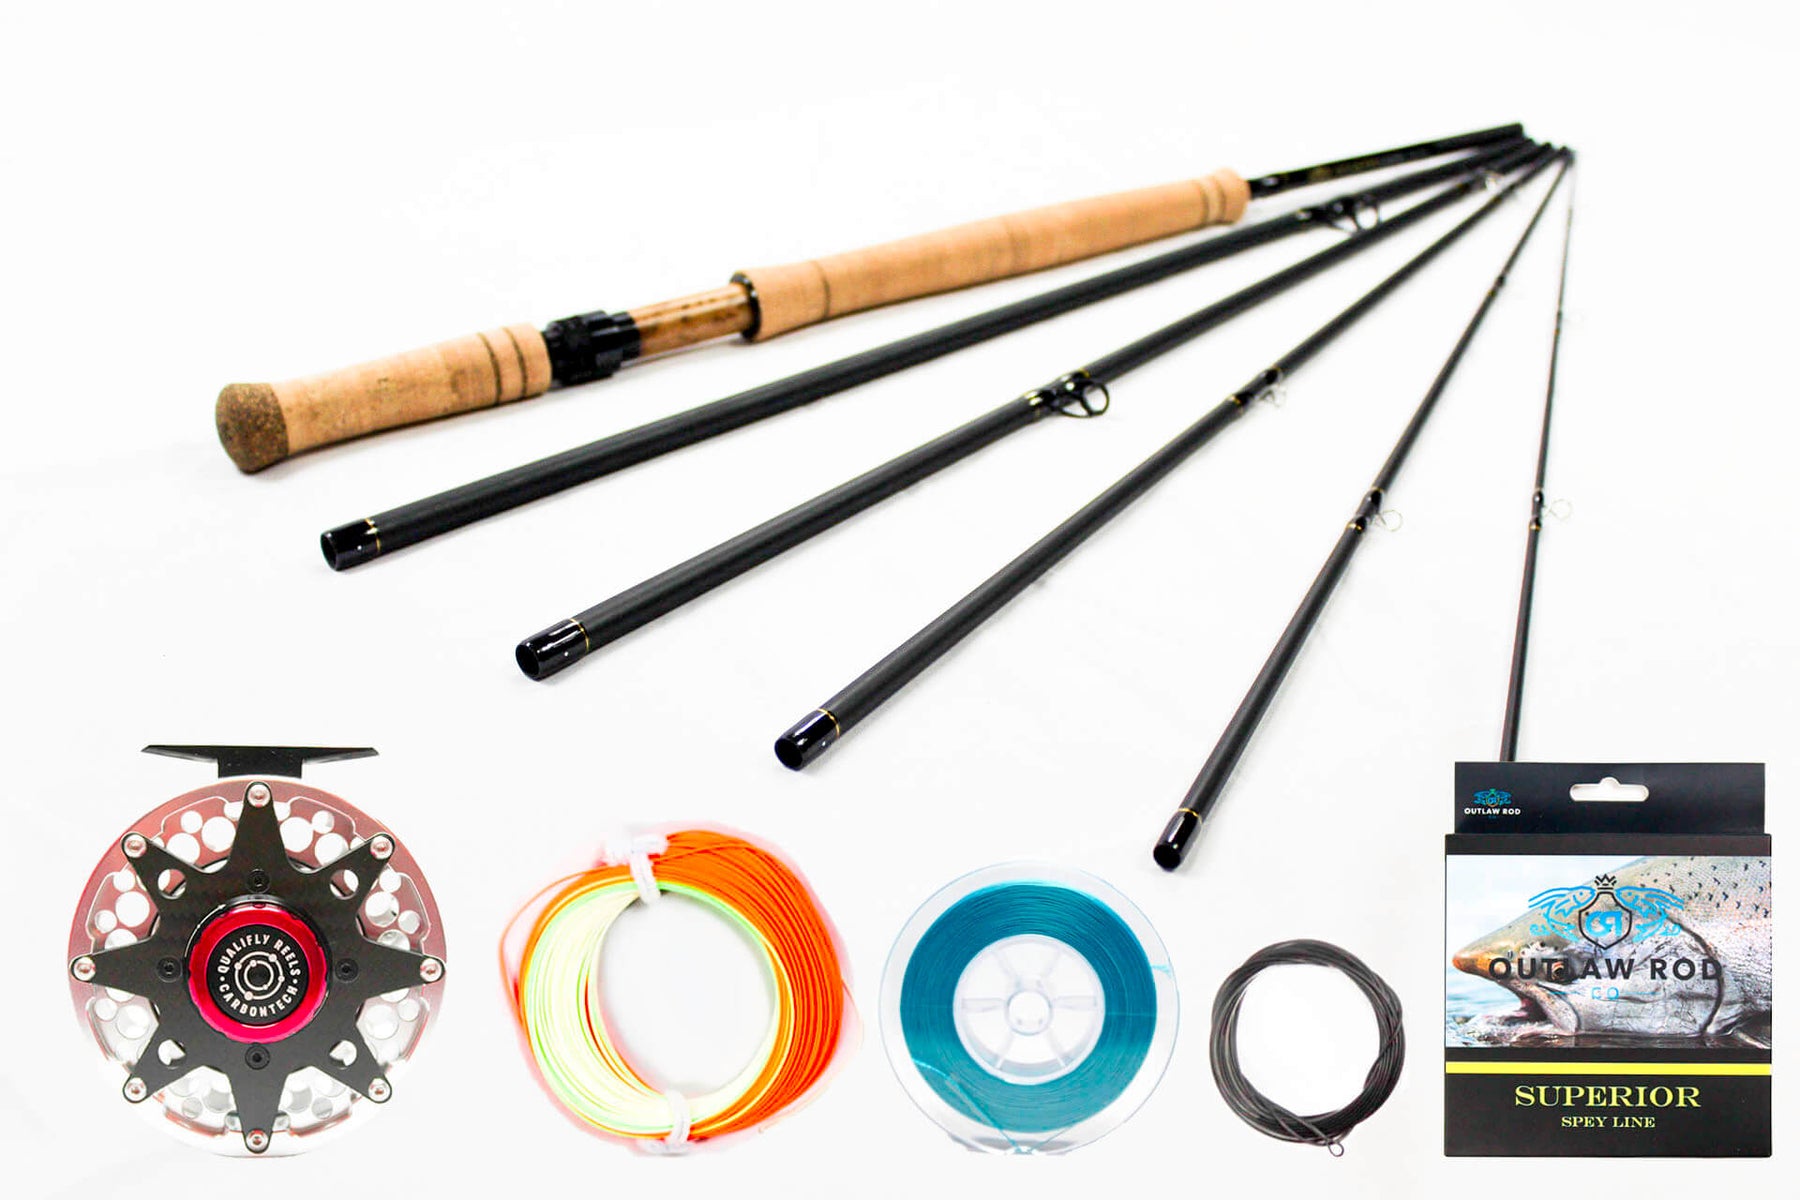 9wt 14ft M-Series (Spey Rod) and Oversized 11-12wt Qualifly Carbontech –  Outlaw Rod Co.